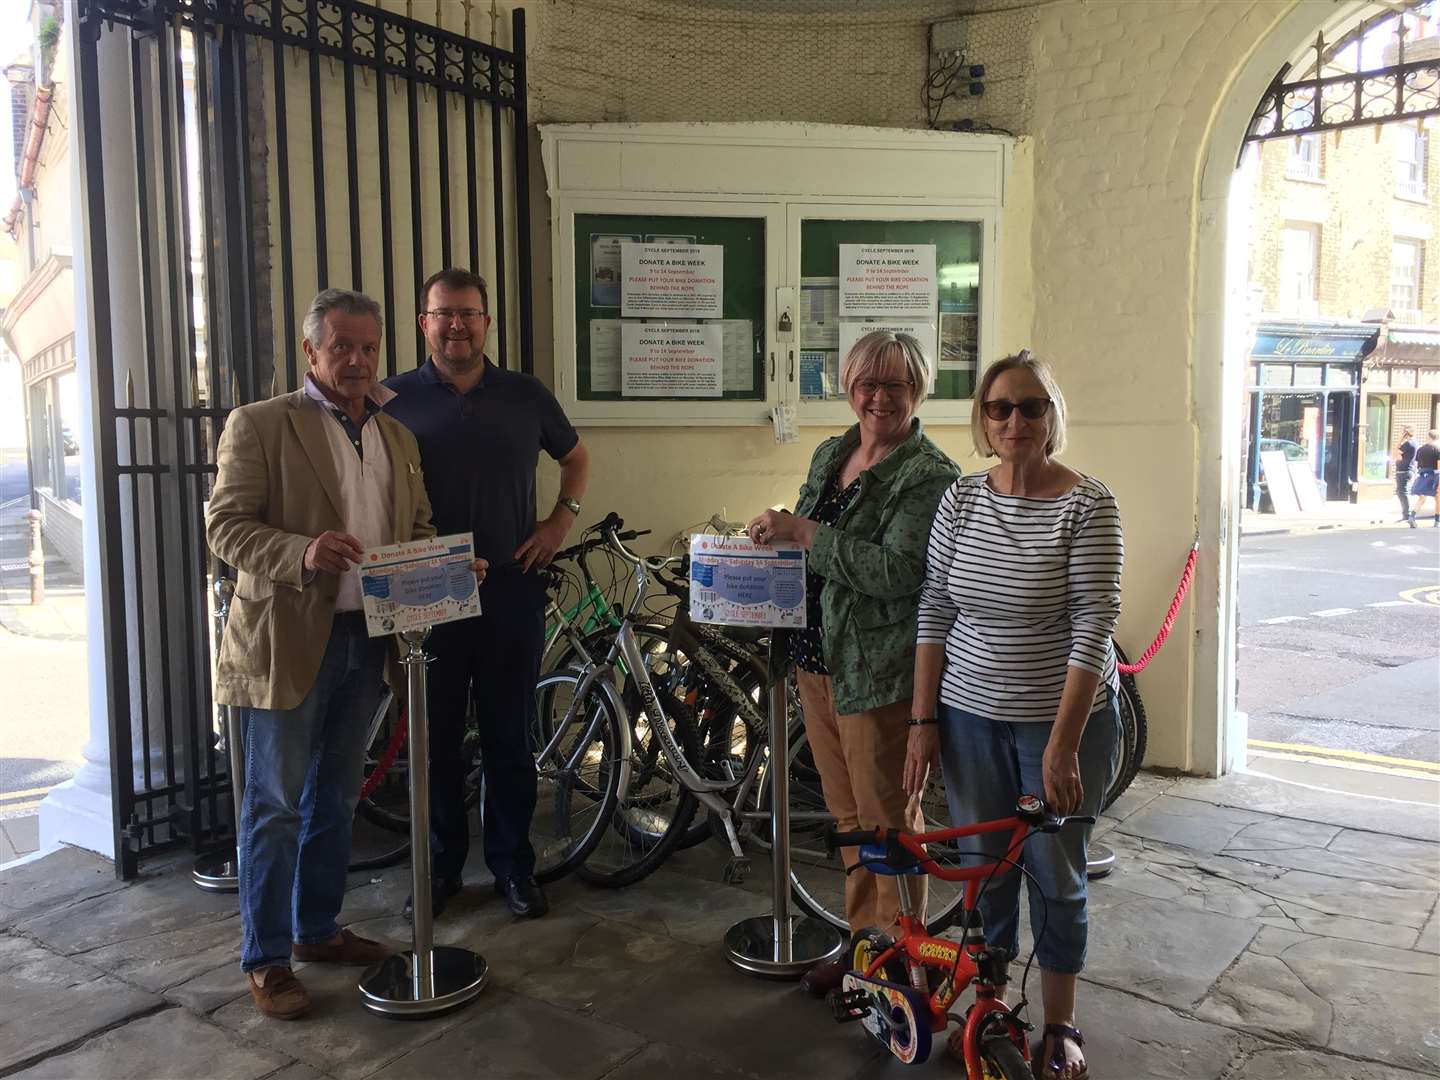 Cllr Sue Beer, Councillor Anne Farrington, Cllr Lee Kettlewell and Cllr Oliver Richardson check out the bikes donated to Deal Town Council’s Cycle Friendly Deal project